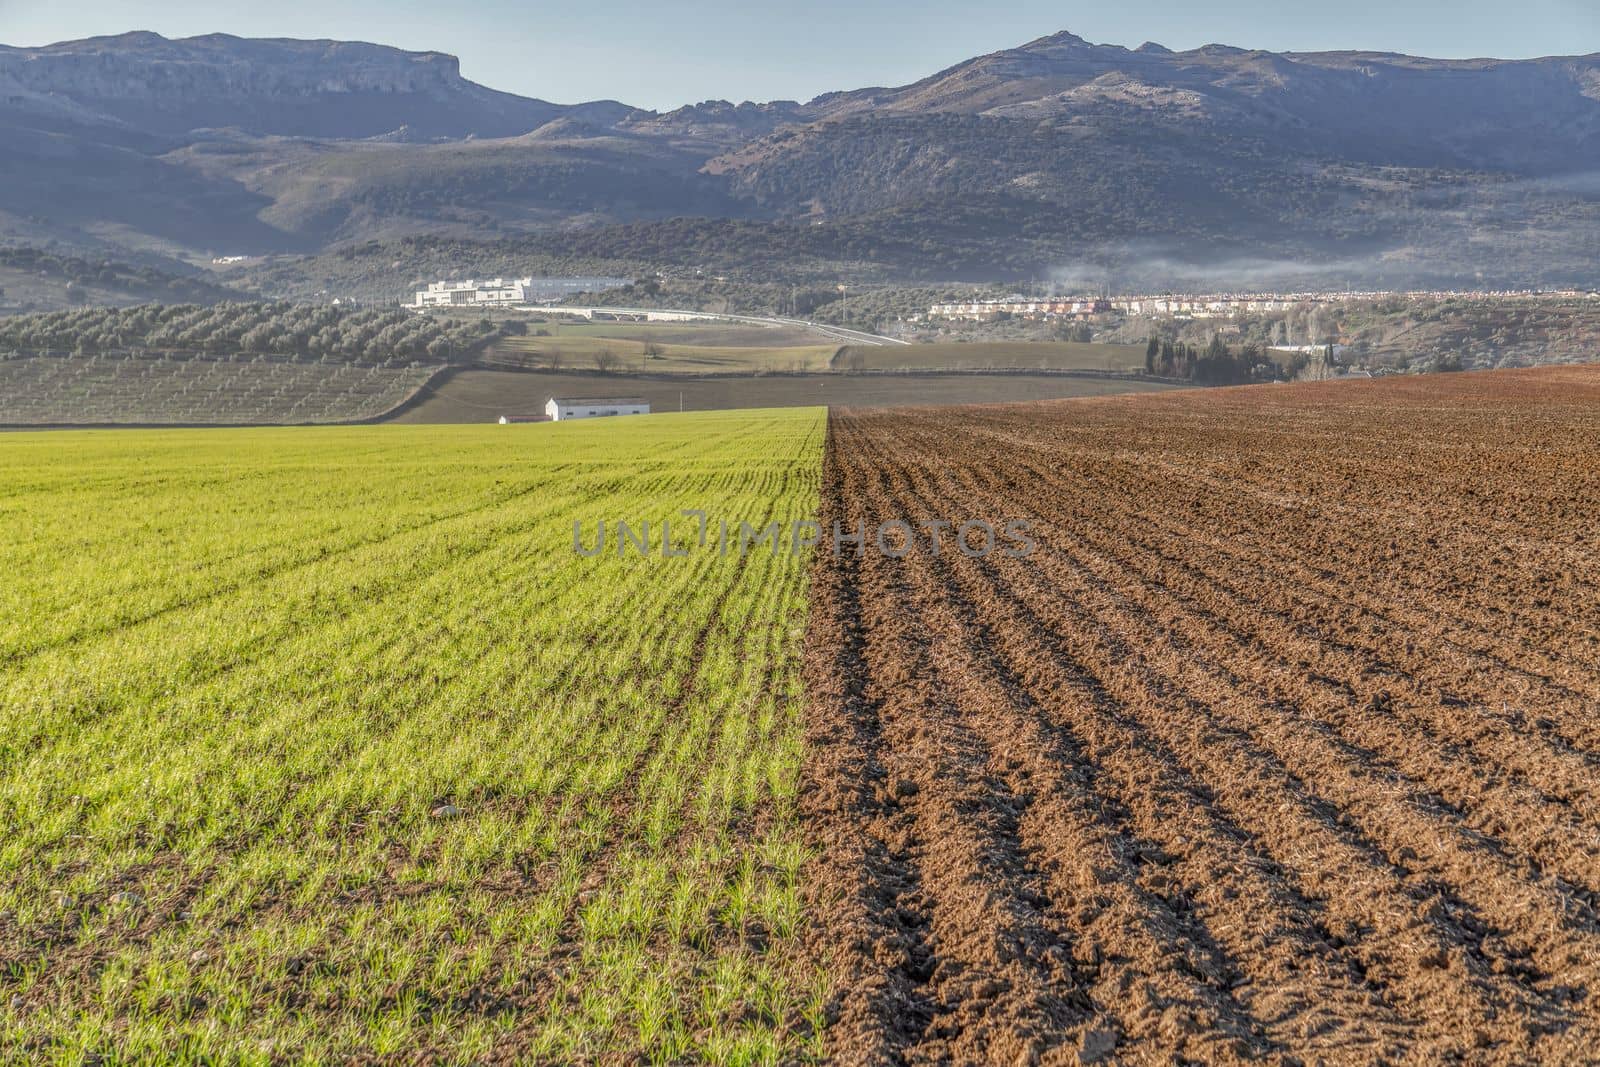 divided crop field, one side with wheat, other side without cultivation by joseantona